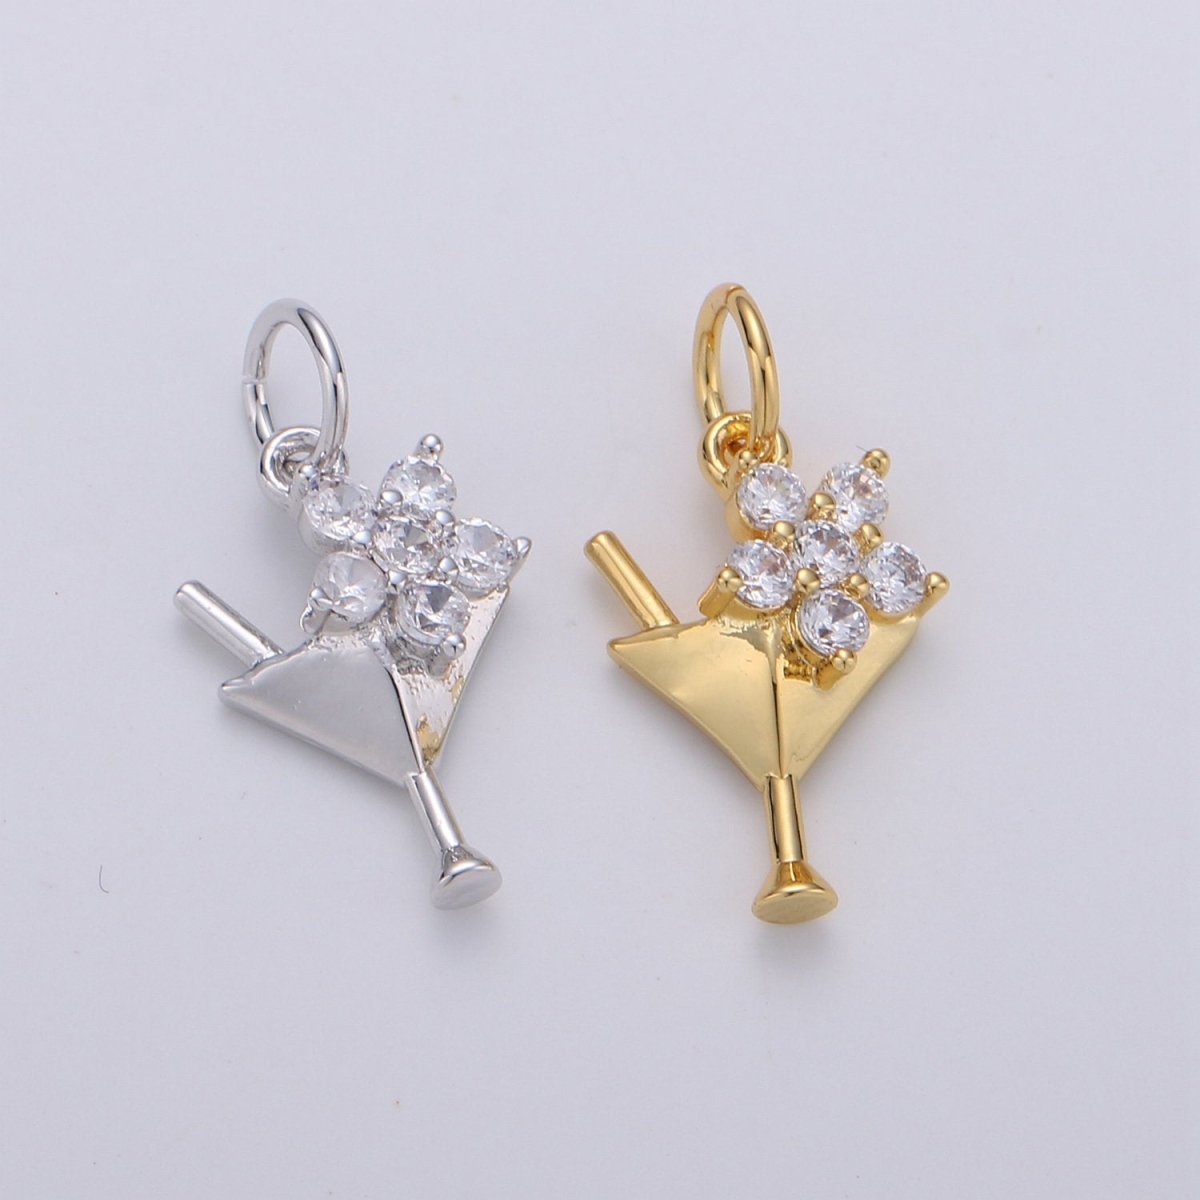 Gold CZ Martini Charm with Cz Charm, Cubic Gold Drink Glass with Micro Pave Pendant, Silver Bar wine Charm Pendant in 24k gold Filled D-289 - DLUXCA